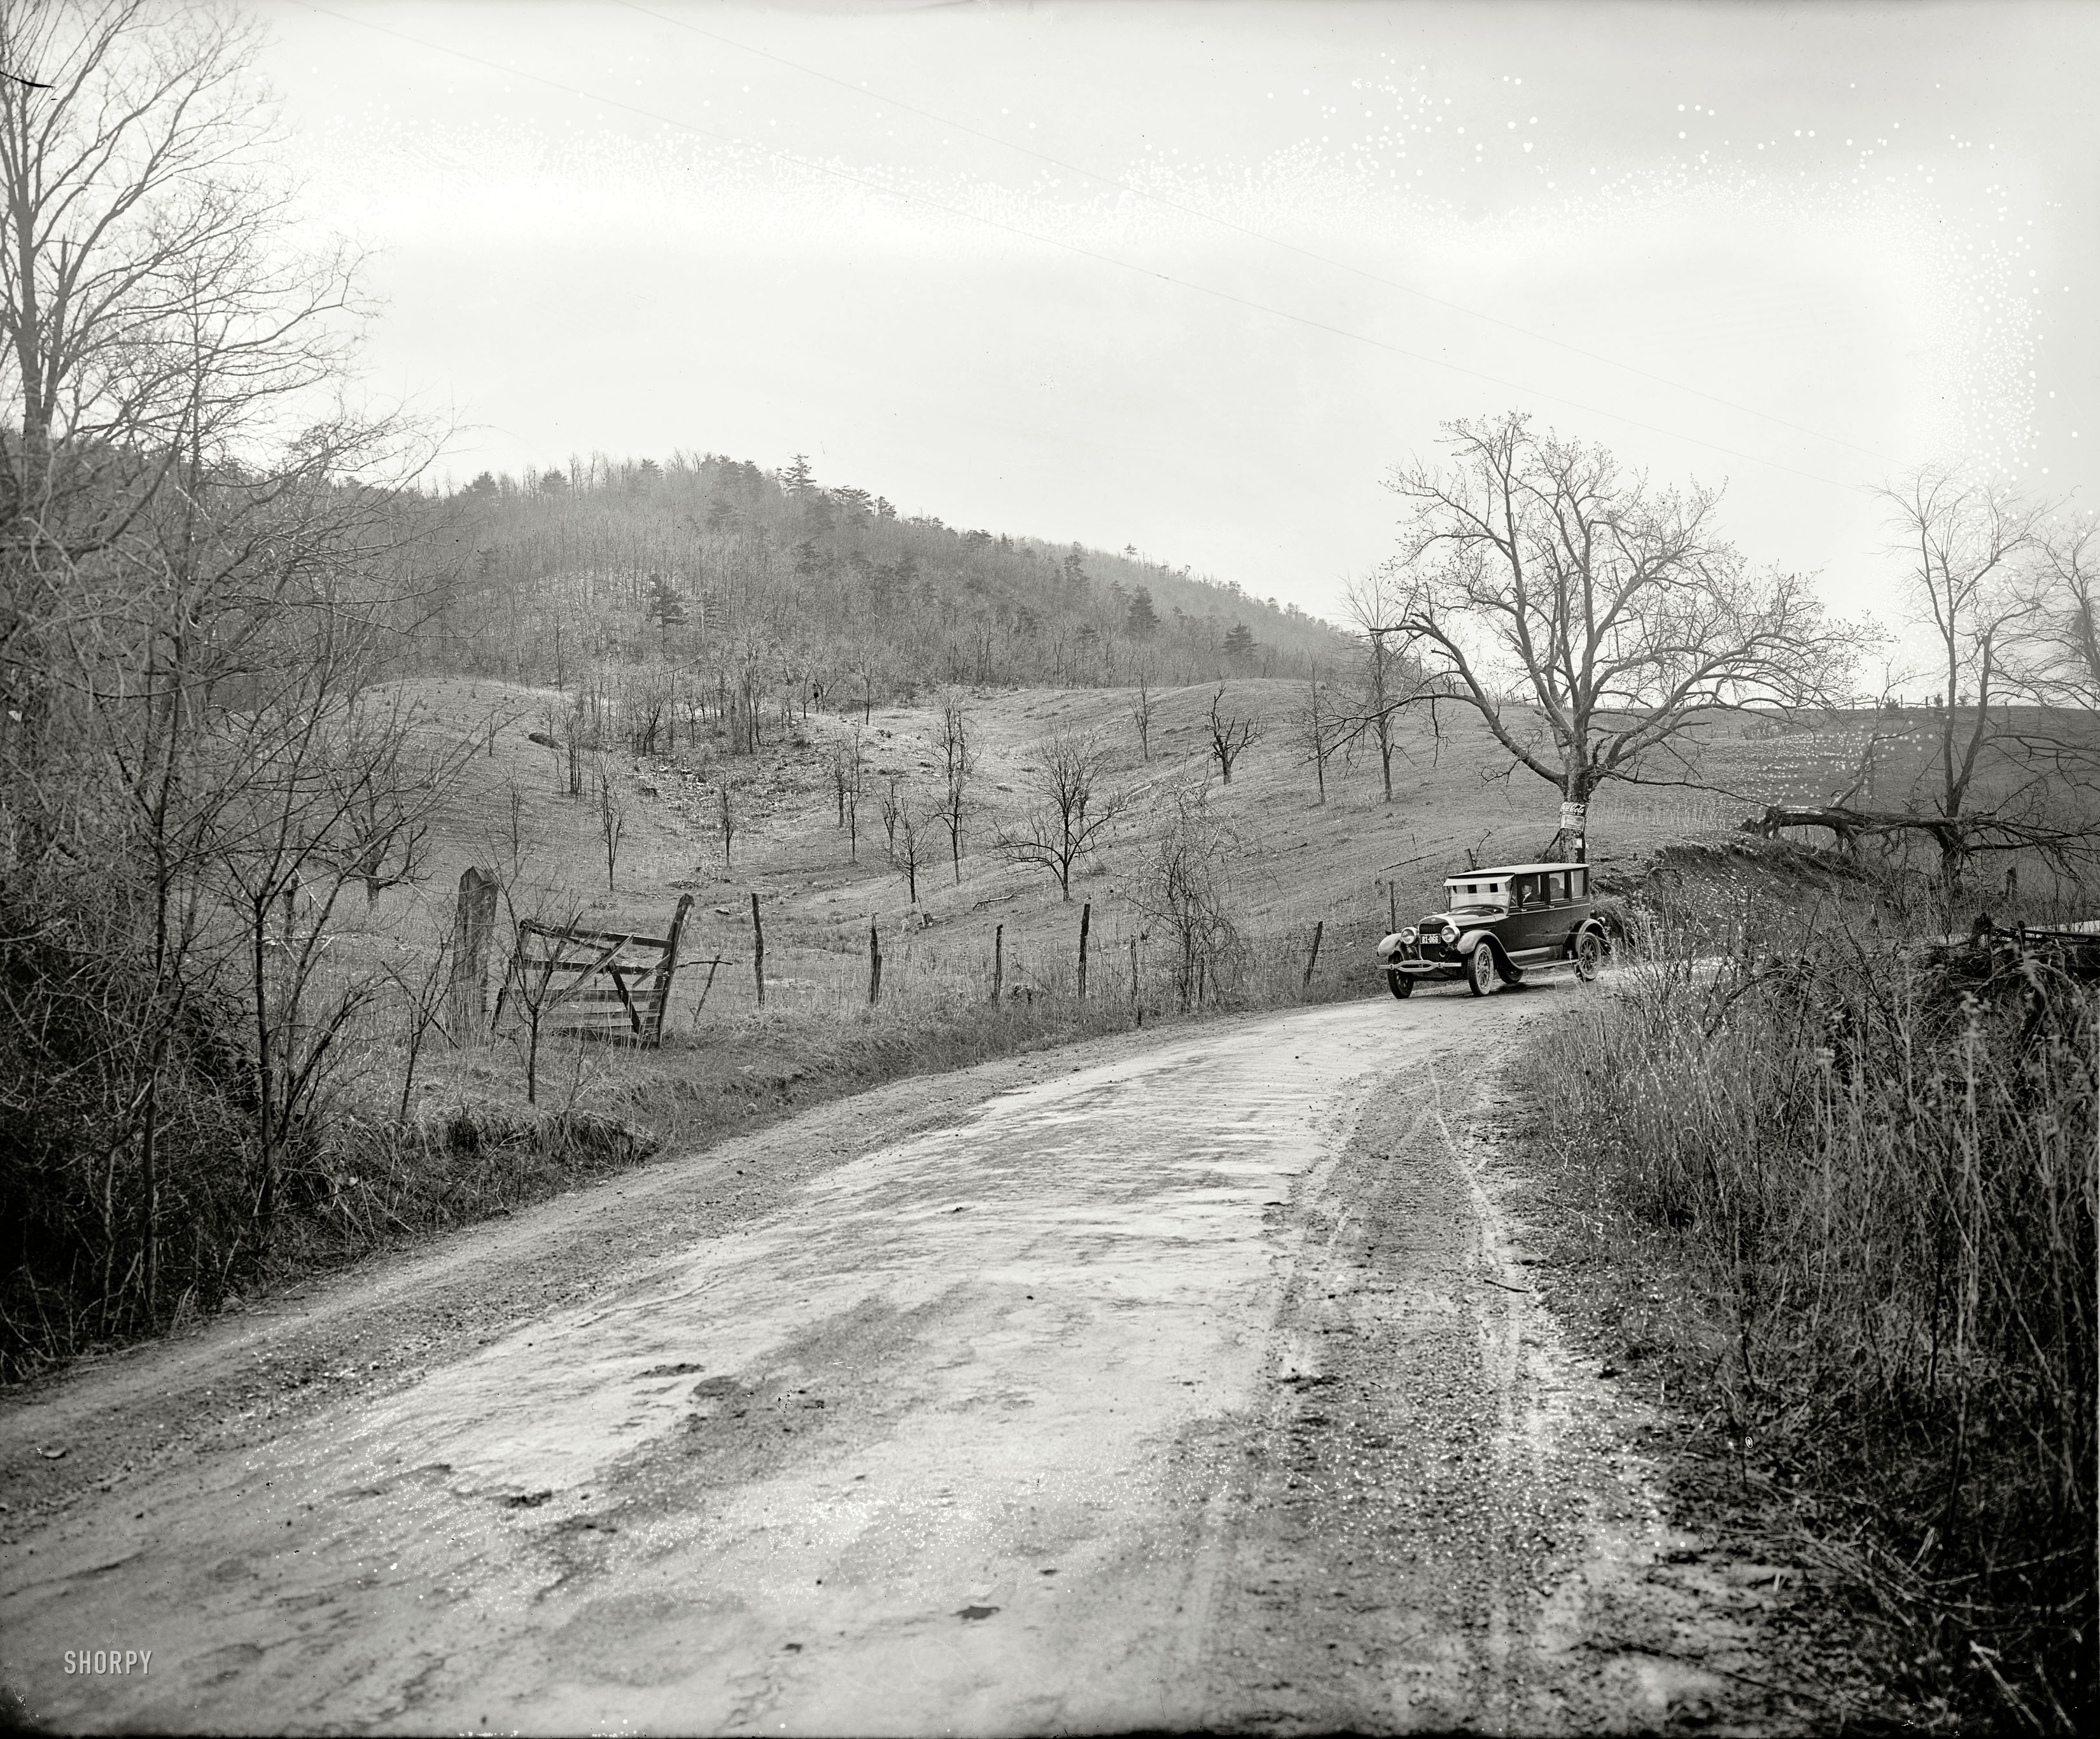 Circa 1925. "Ford Motor Co. -- Lincoln car in Shenandoah National Park, Virginia." National Photo Company Collection glass negative. View full size.